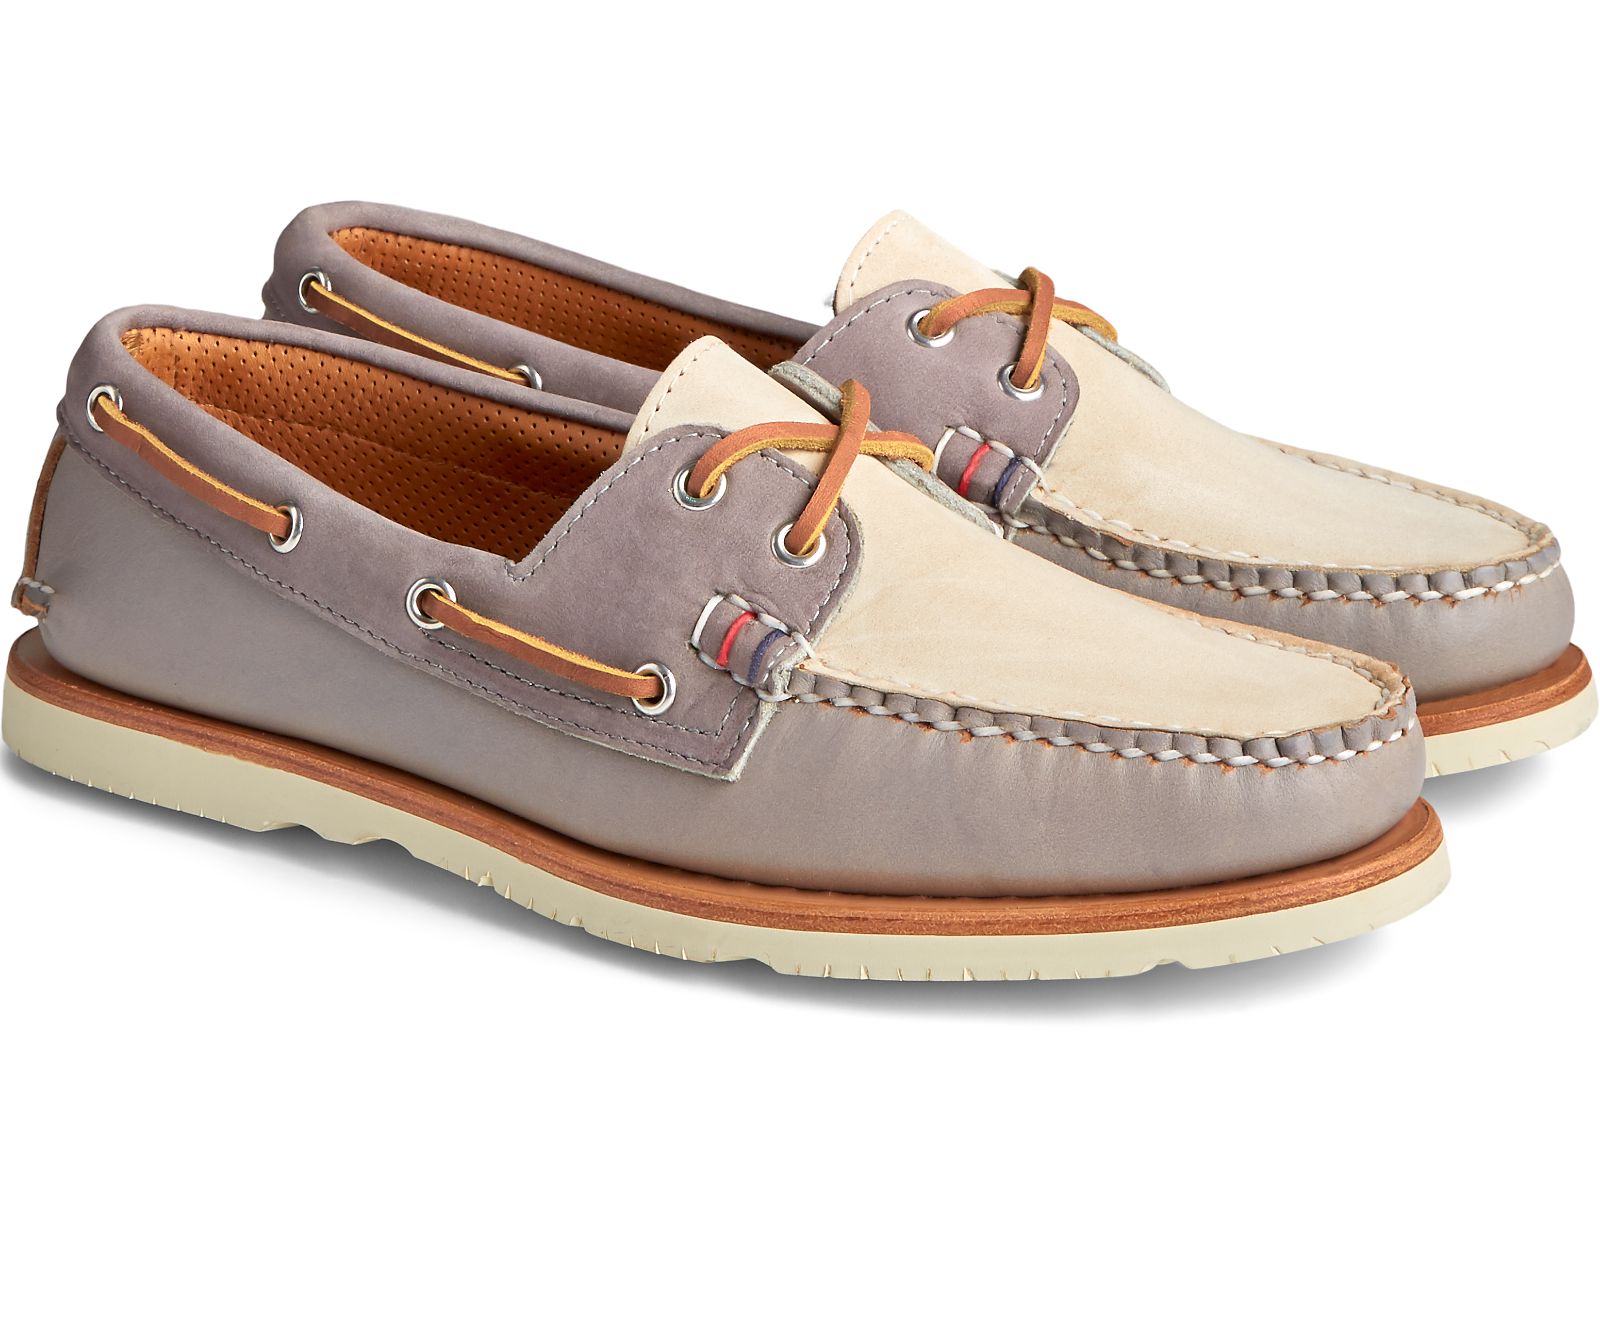 Men's Gold Cup Handcrafted in Maine Boat Shoe - Grey Tri-Tone